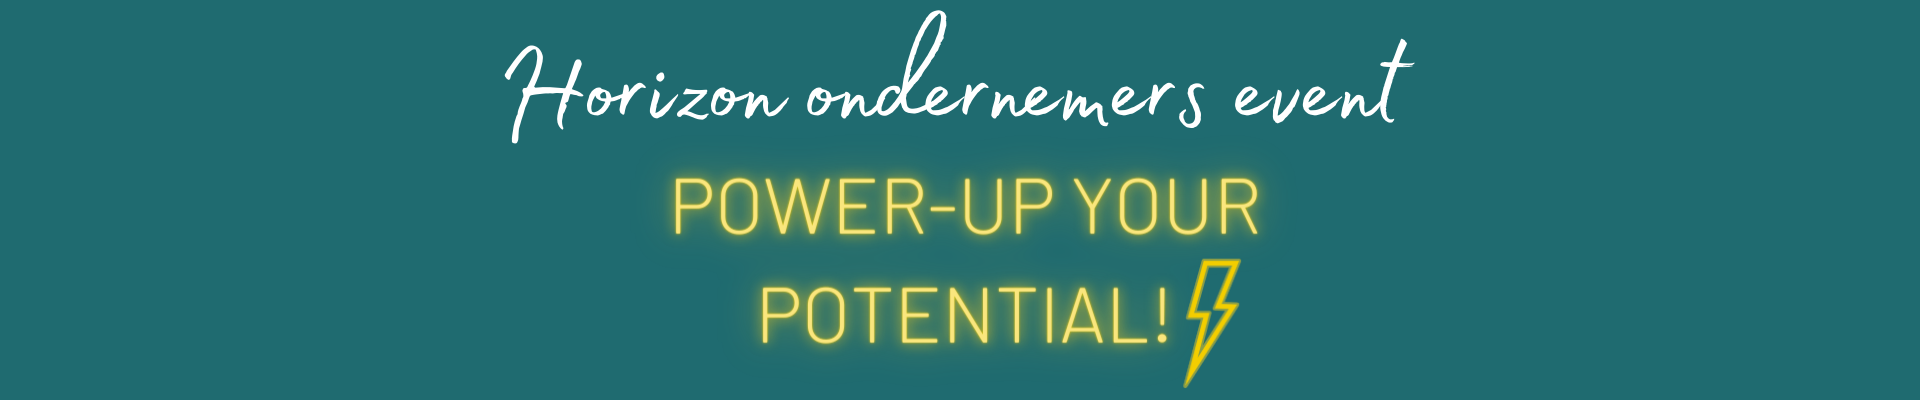 Power-up your potential!